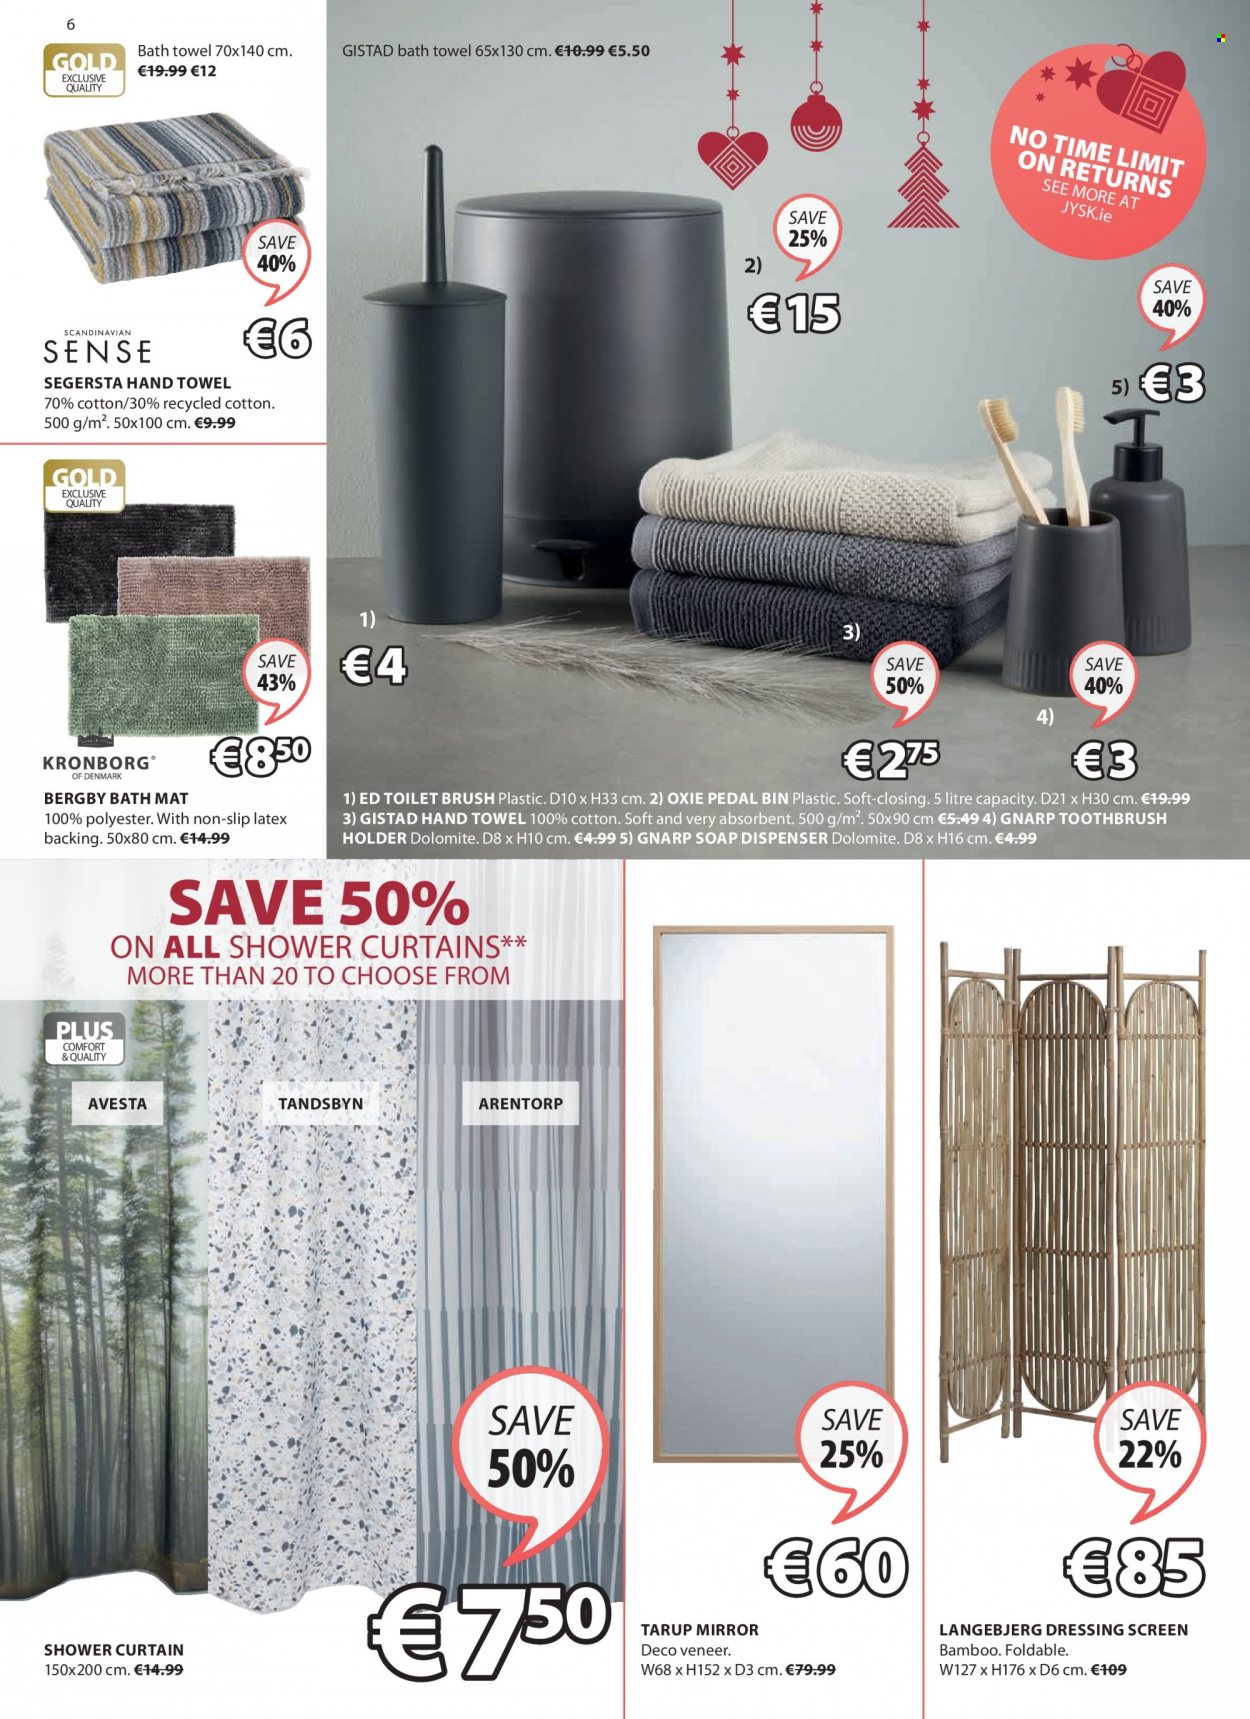 thumbnail - JYSK offer  - 18.11.2021 - 01.12.2021 - Sales products - mirror, bin, holder, shower curtain, soap dispenser, toilet brush, toothbrush holder, dispenser, curtain, bath mat, bath towel, towel, hand towel. Page 6.